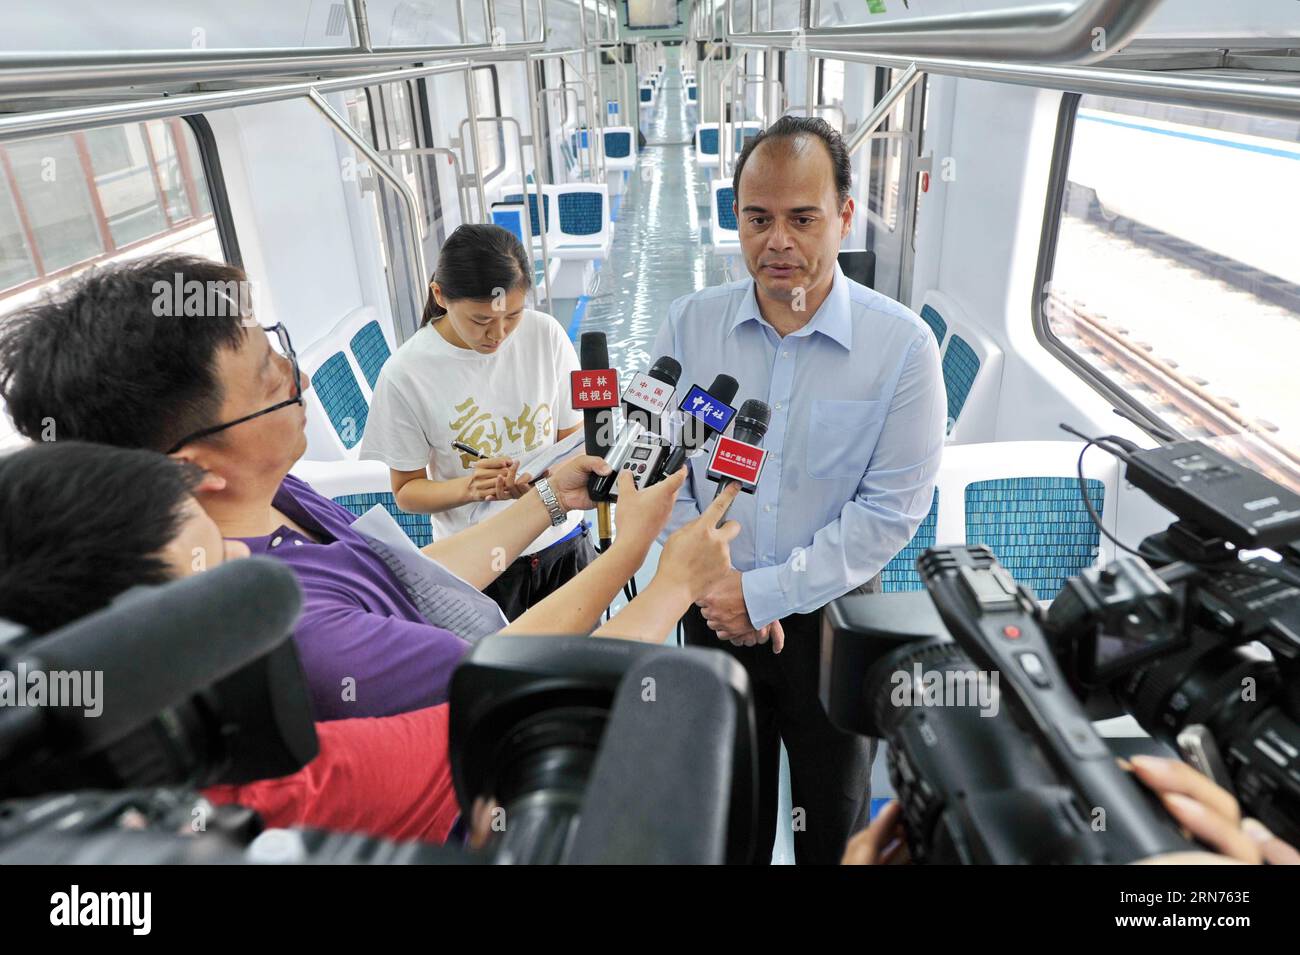 (150819) -- CHANGCHUN, Aug. 19, 2015 -- Roberto Marques da Costa Neto (R), president of a Brazilian transportation company, receives an interview when visiting the electric train produced by Changchun Railway Vehicles Company for Brazil in Changchun, northeast China s Jilin Province, Aug. 19, 2015. The 100 trains made in China would come into service for the coming Rio 2016 Olympic Games. ) (zkr) CHINA-CHANGCHUN-TRAIN-BRAZIL-COMPLETION(CN) ZhangxNan PUBLICATIONxNOTxINxCHN   150819 Changchun Aug 19 2015 Roberto Marques there Costa Neto r President of a Brazilian Transportation Company receives Stock Photo